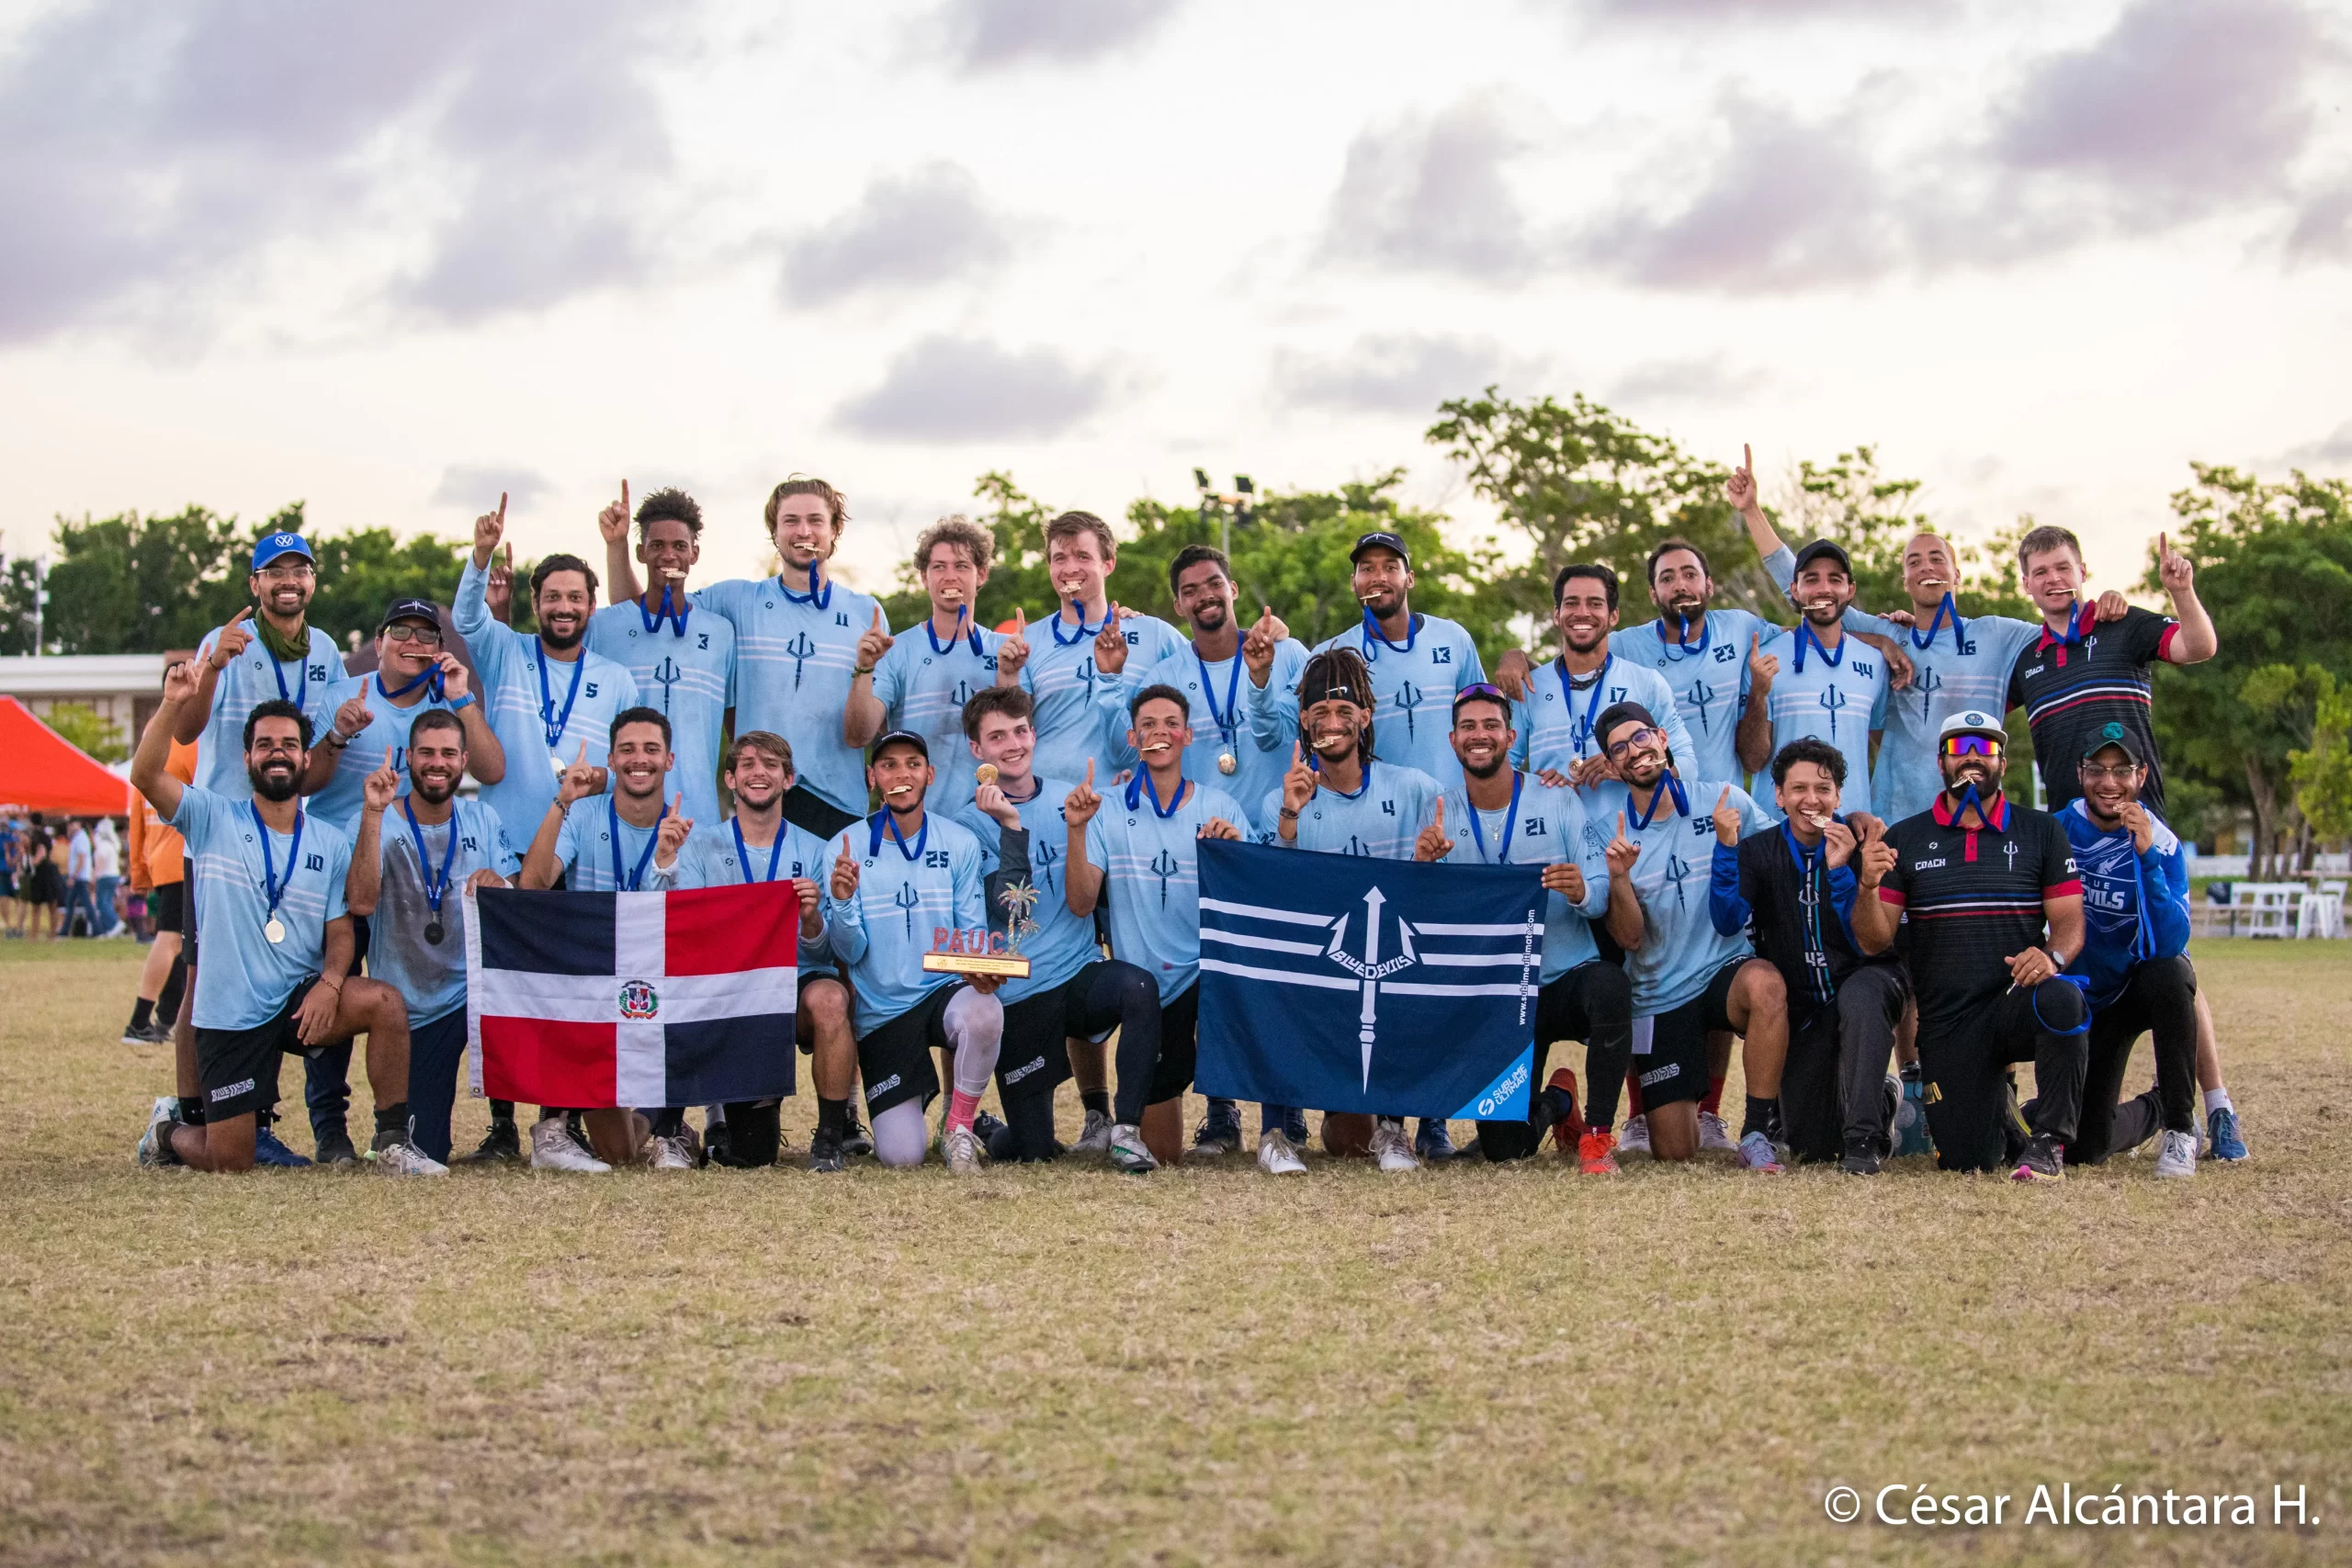 The Blue Devils team that participated in the 2023 Pan American Ultimate Championship (PAUC)